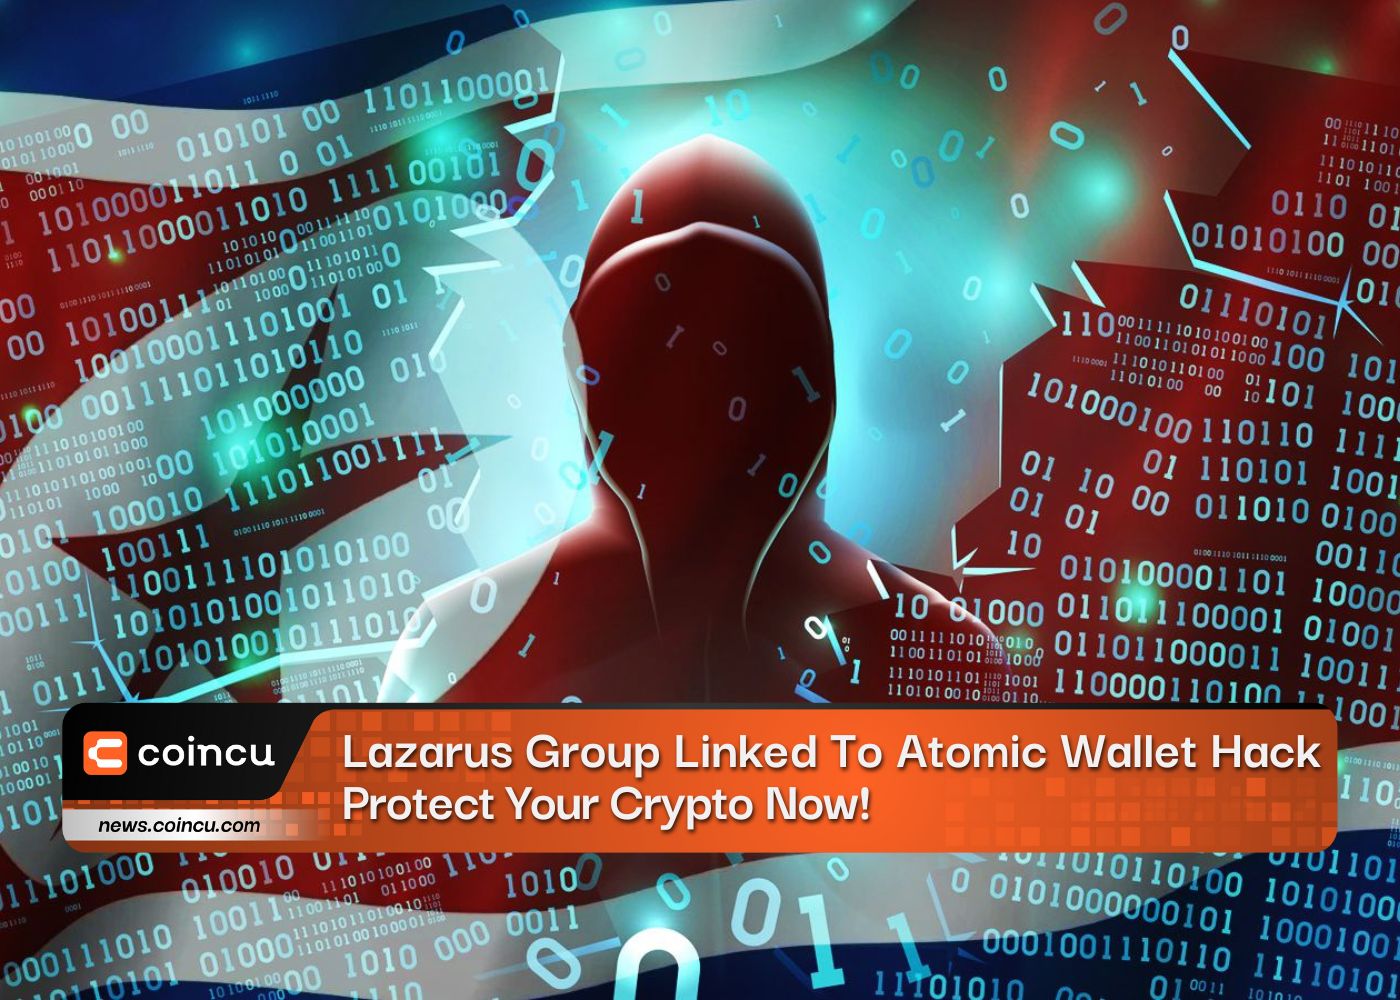 Lazarus Group Linked To Atomic Wallet Hack